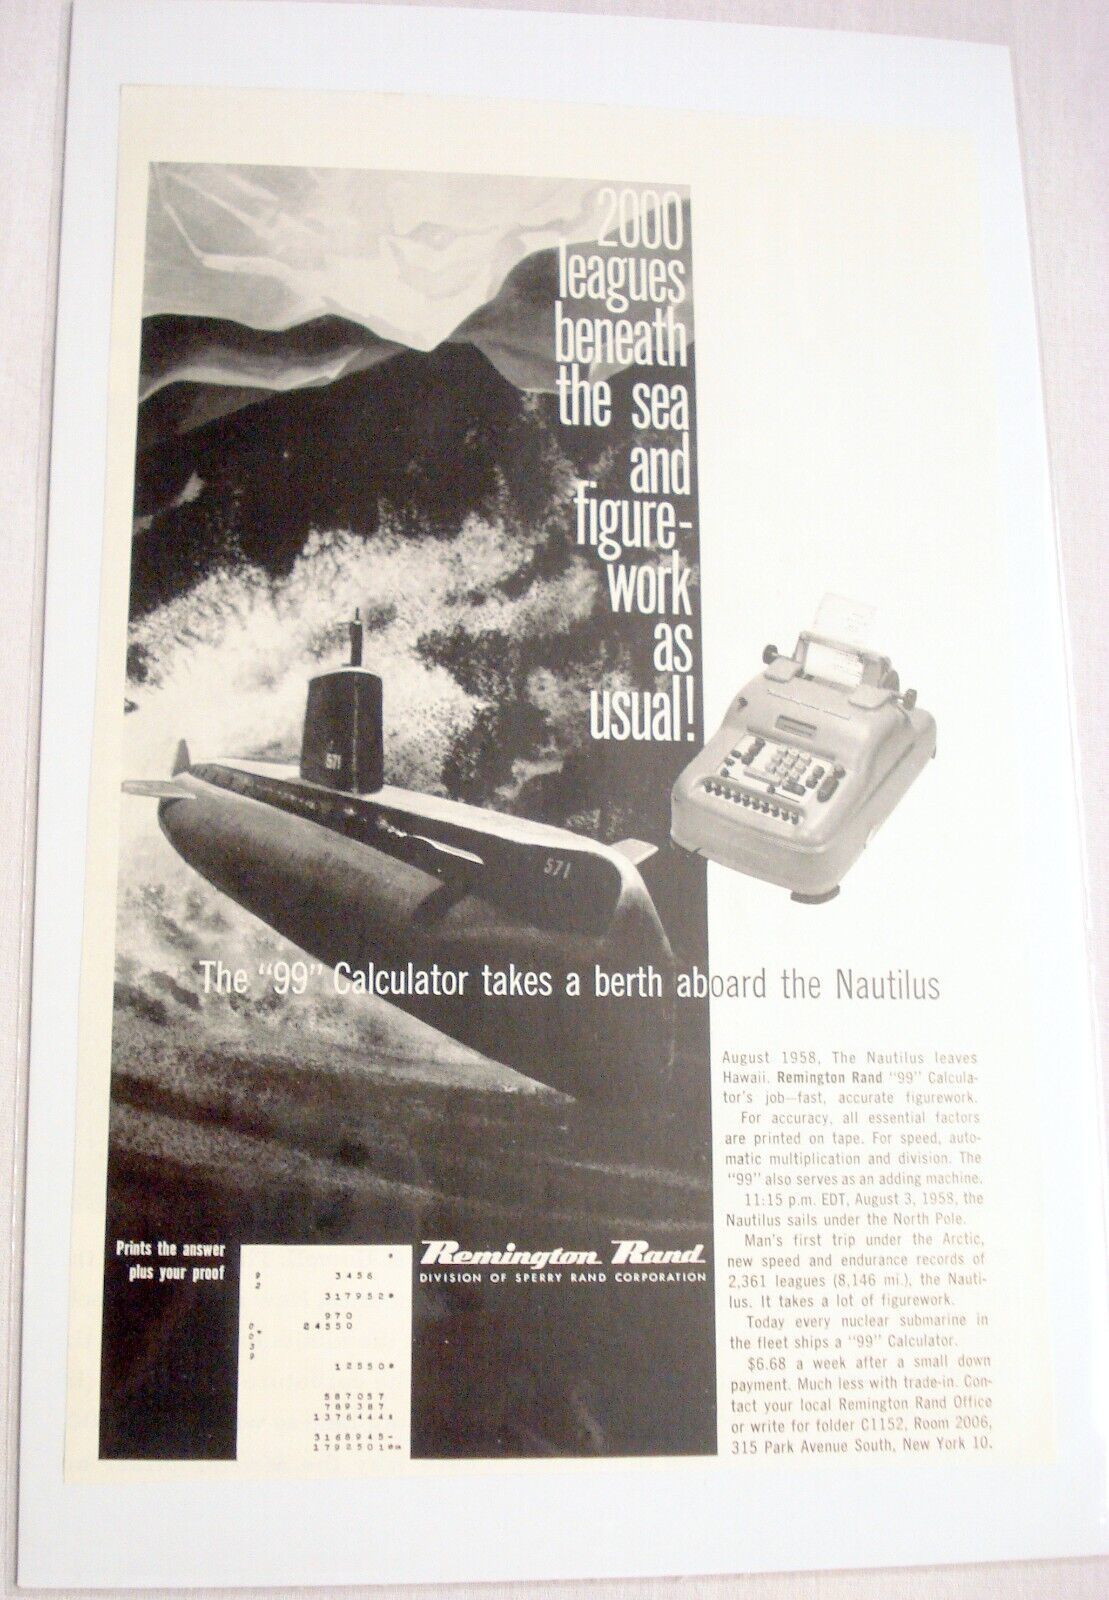 Primary image for 1958 Ad Remington Rand 99 Calculator Takes A Berth Aboard the Nautilus